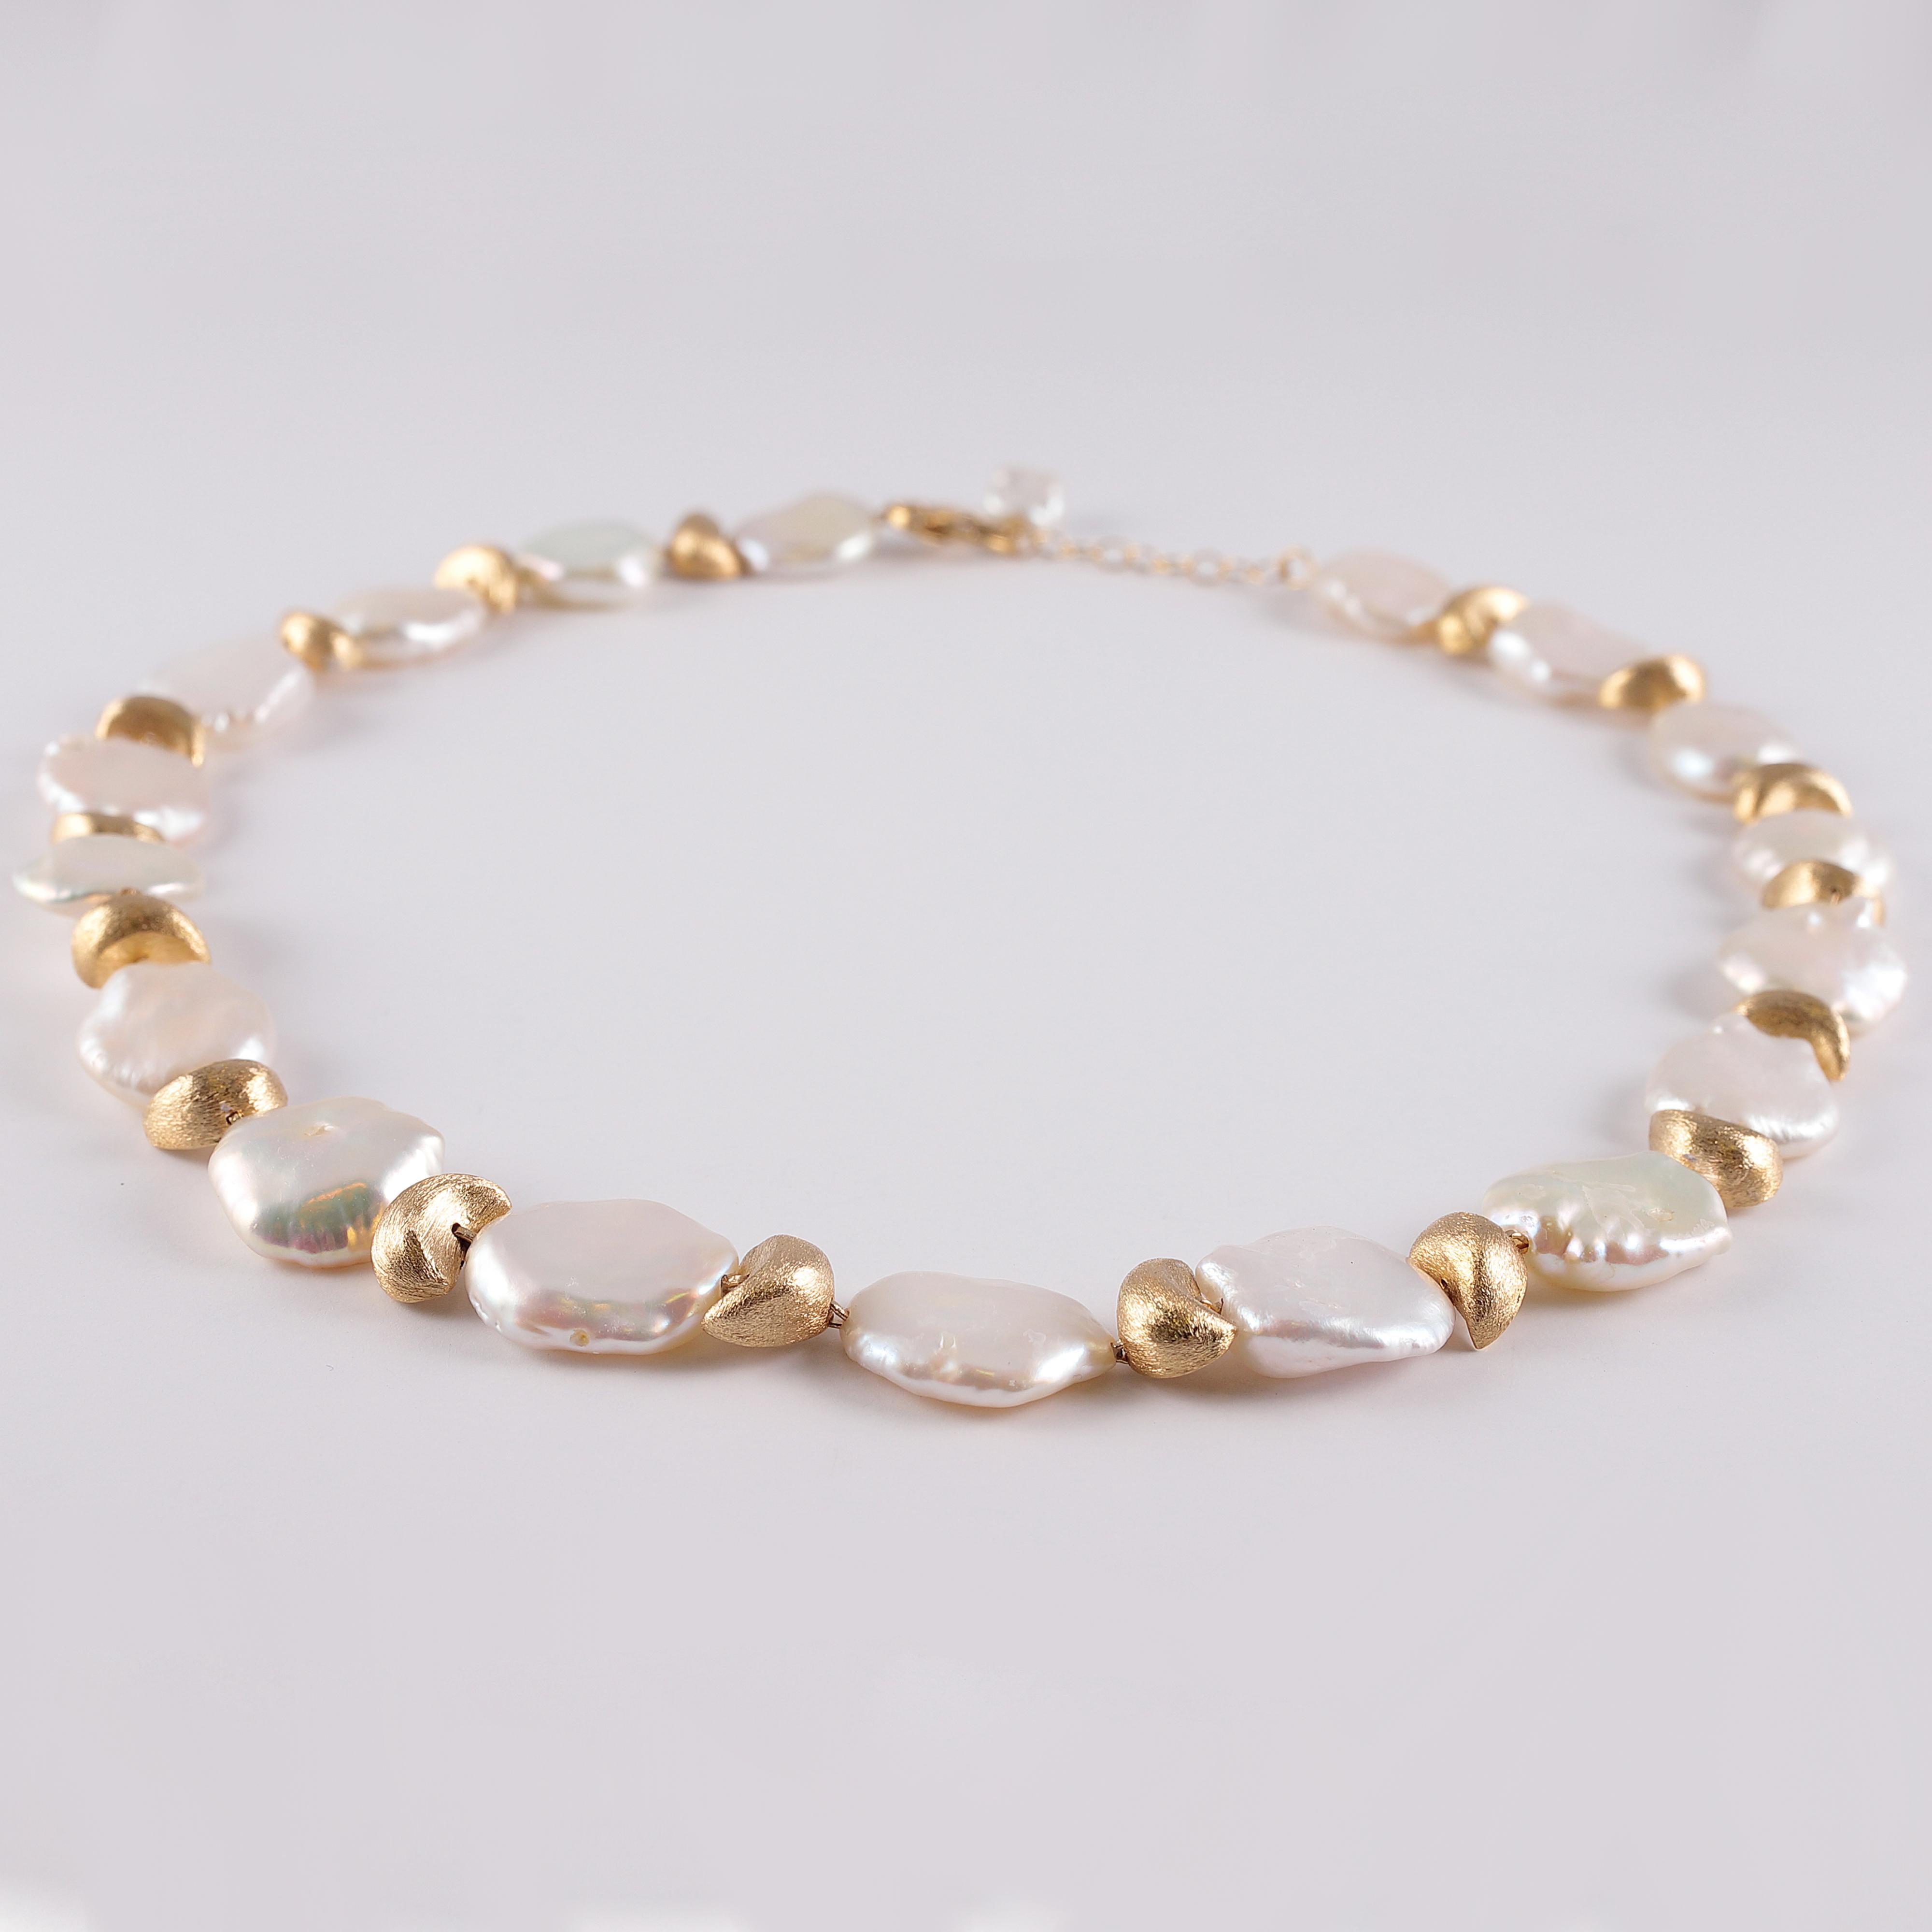  In 18 karat gold, this necklace is perfect for jeans or a dress!  The white Keshi pearls measure approximately 15.00 mm - 16.00 mm each and alternate with textured yellow gold nuggets, all secured with an over sized, lobster clasp  - so easy to get